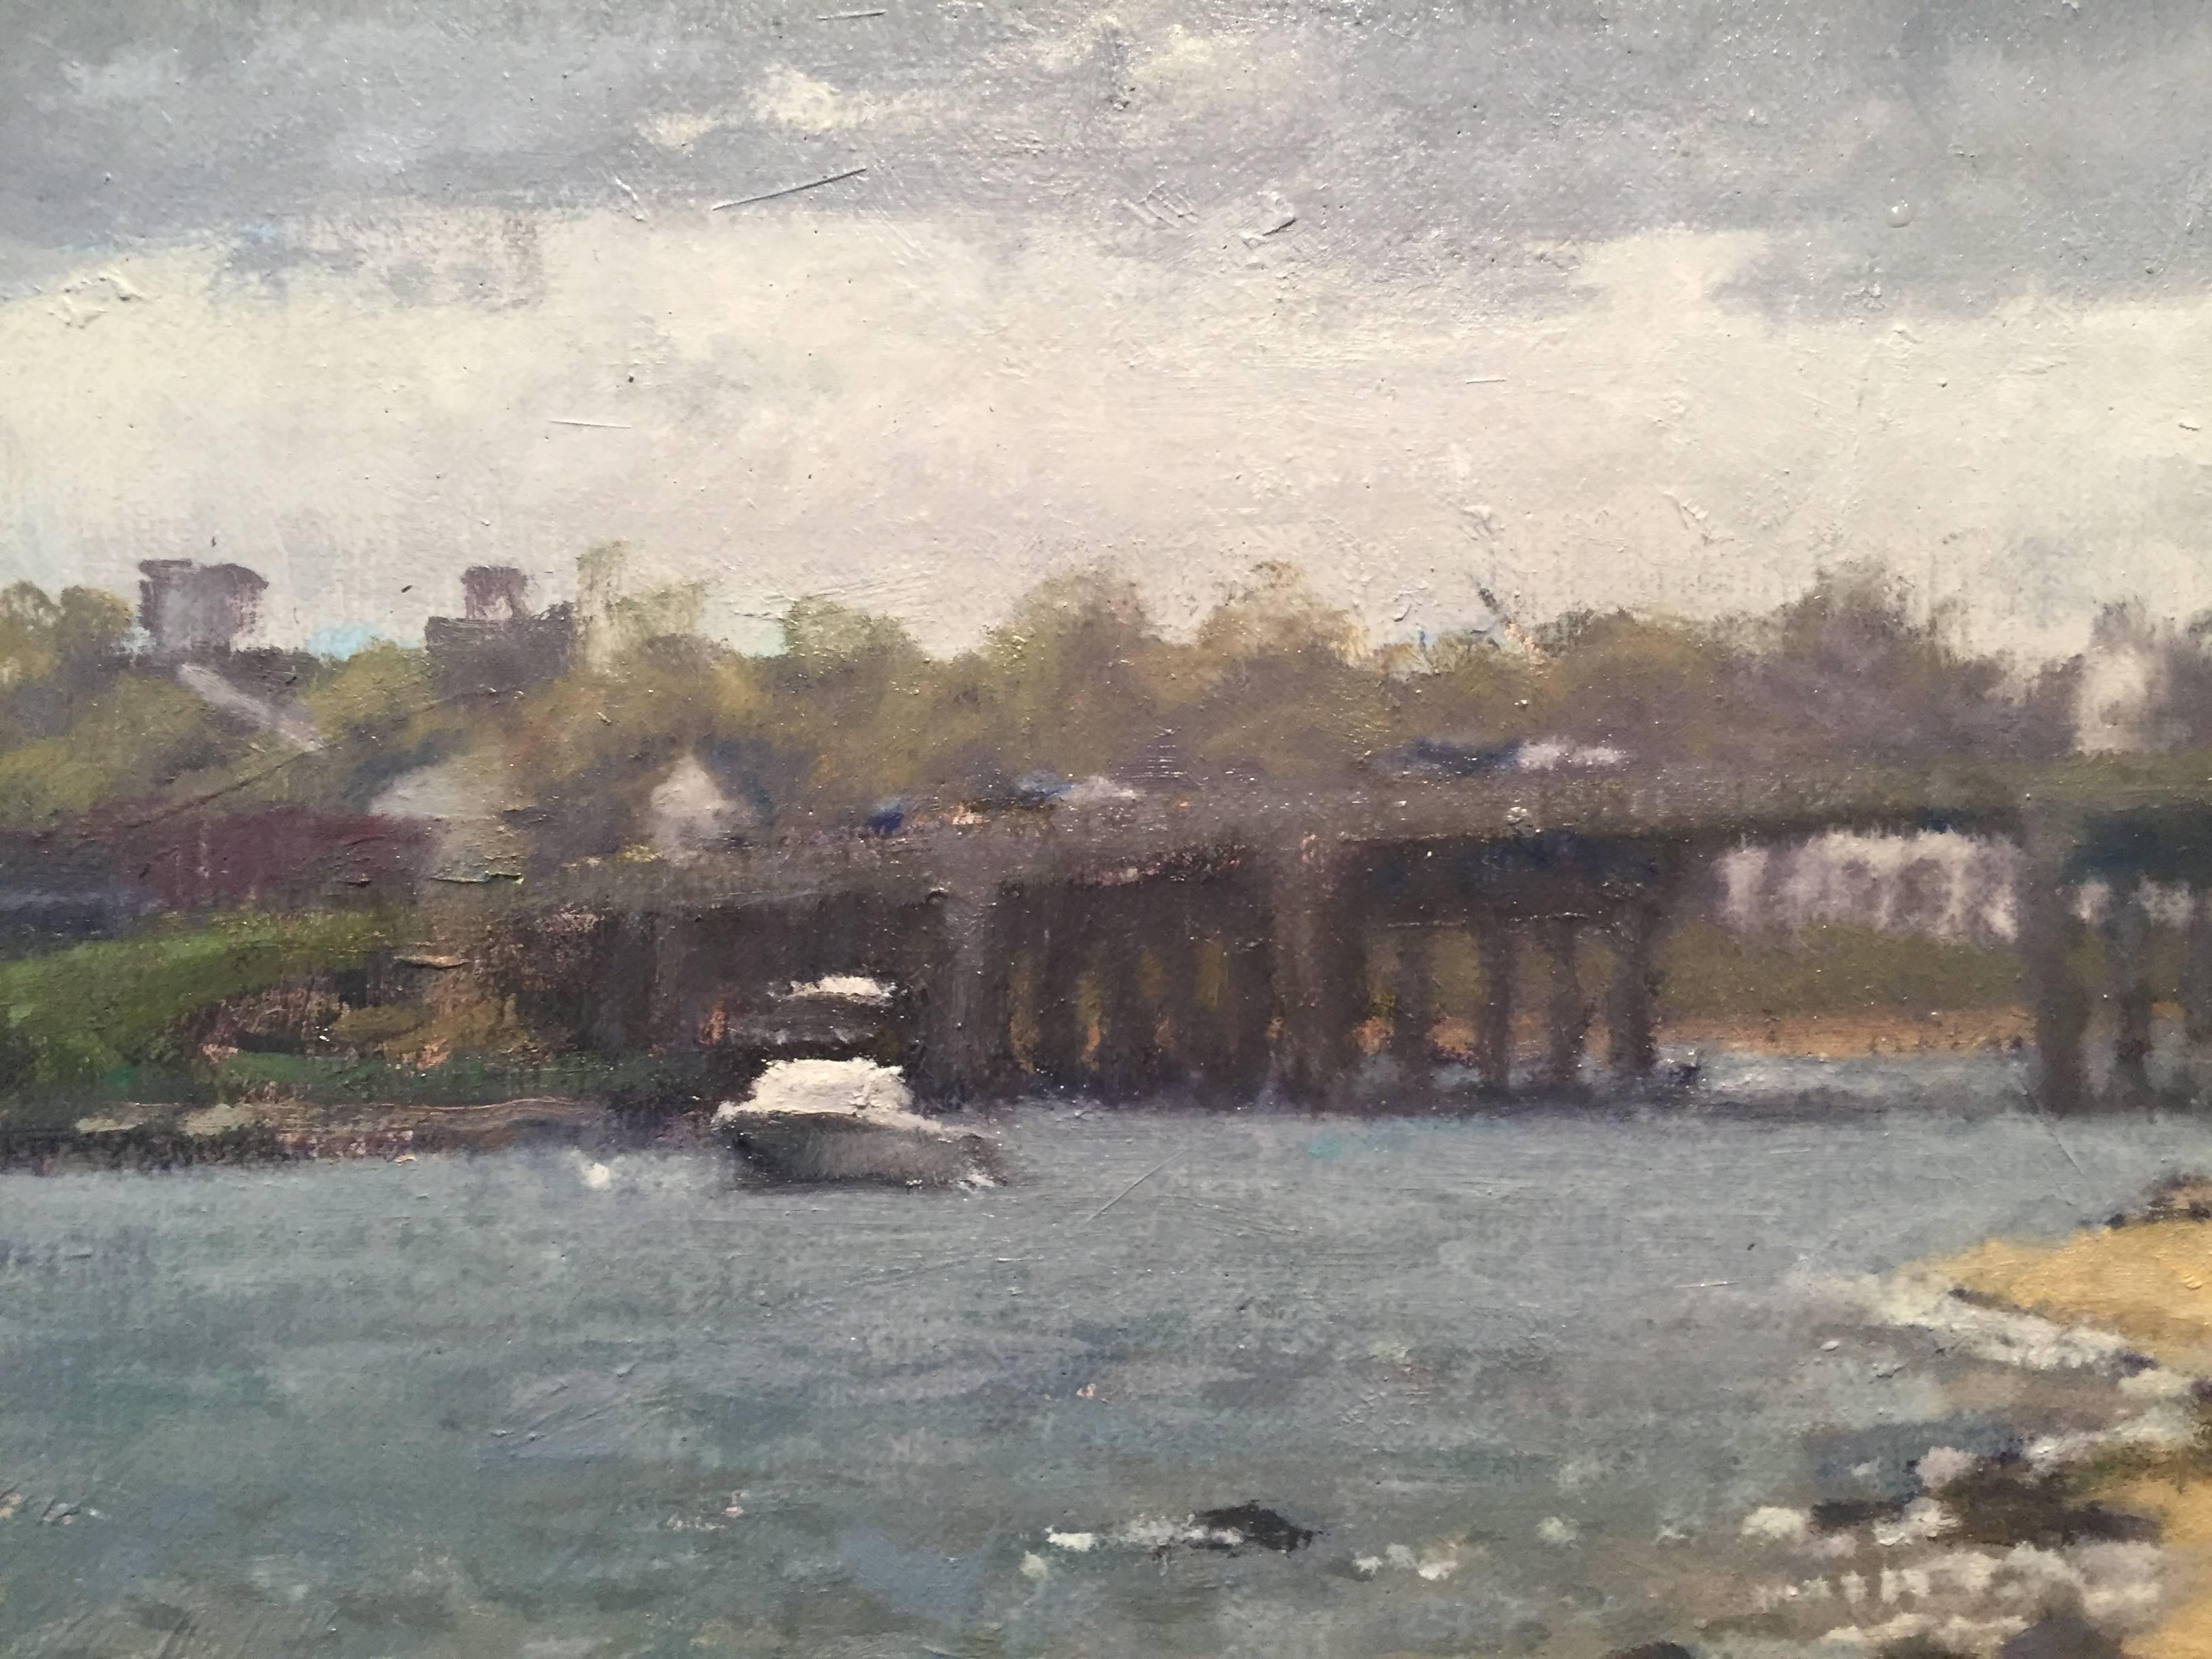 Painted en plein-air in Sag Harbor, New York; Bretzke presents the beautiful Sag Harbor Bridge which links the harbor village to the village of North Haven. A foggy atmosphere restricts a certain crispness in execution. Grey clouds float above a